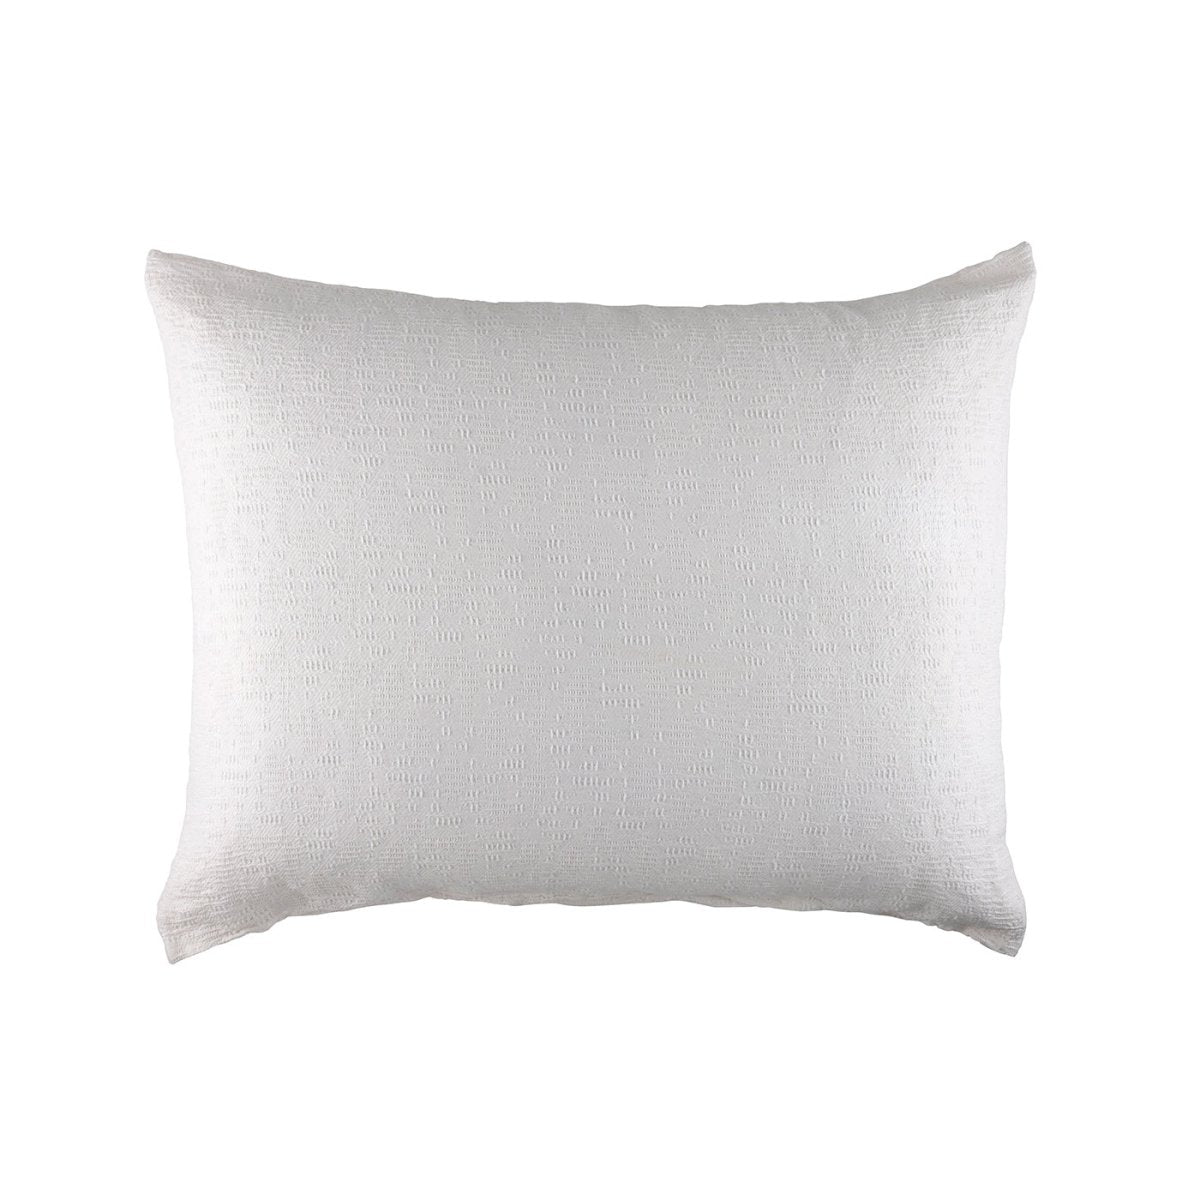 River White Luxe Euro Pillow by Lili Alessandra | Fig Linens